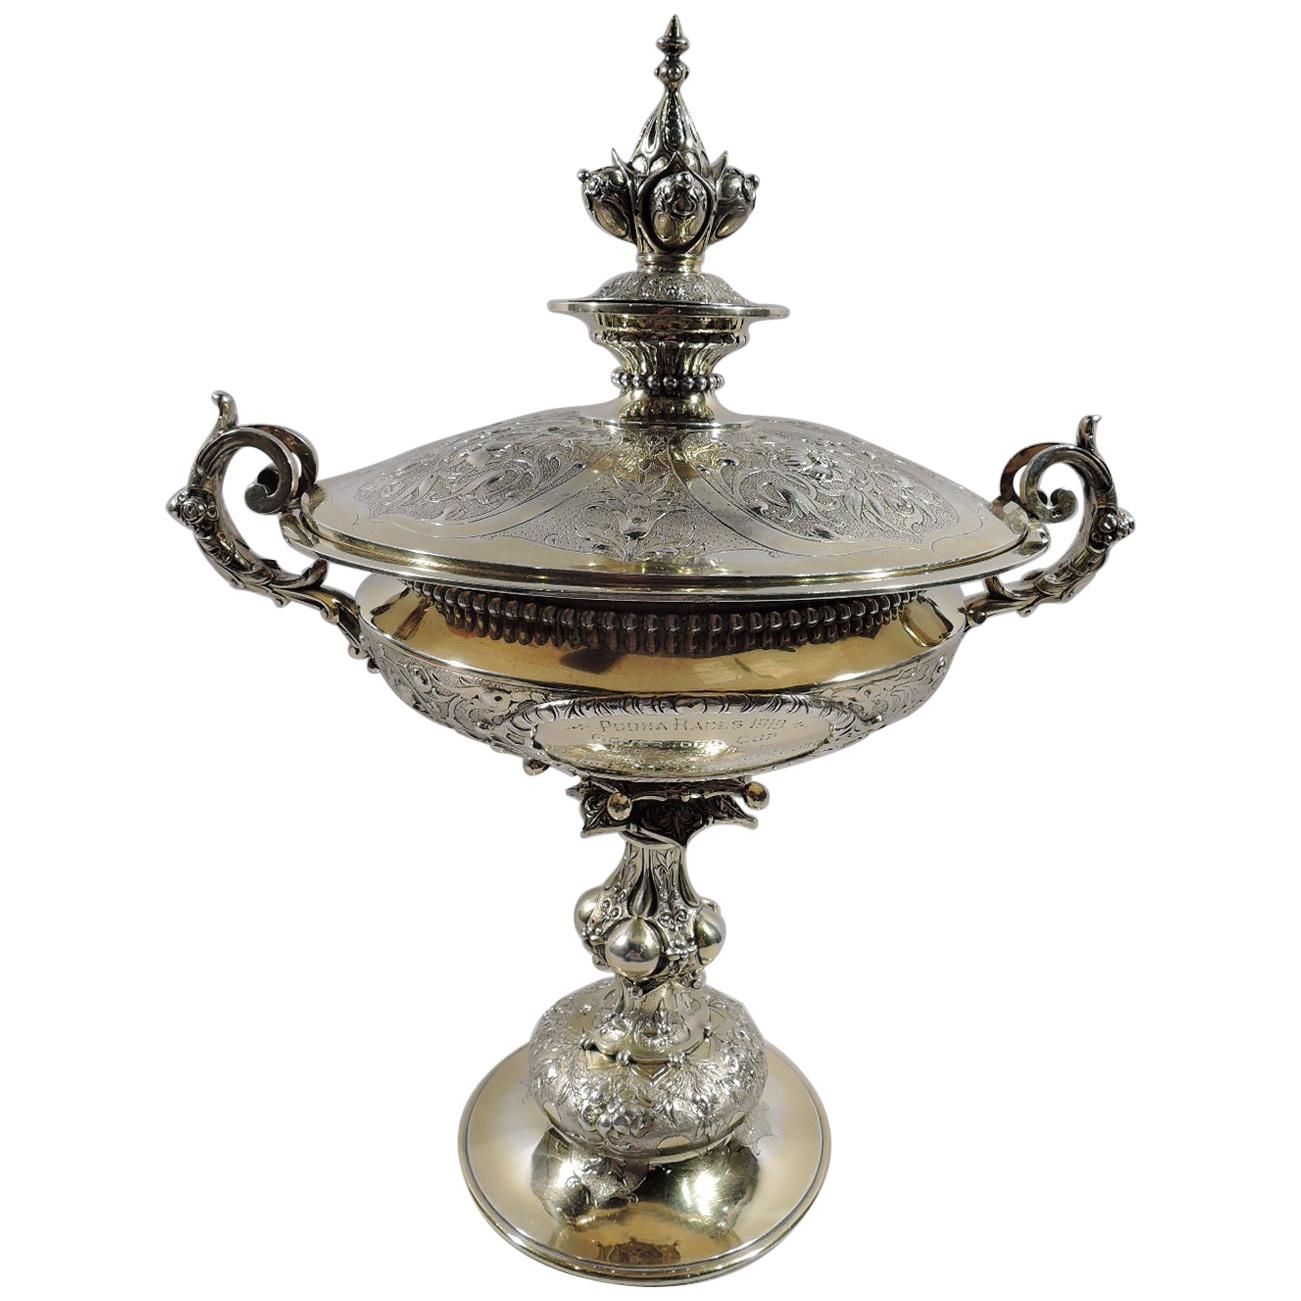 Souvenir of Raj India: Governor's Cup Poona Race Trophy, 1919